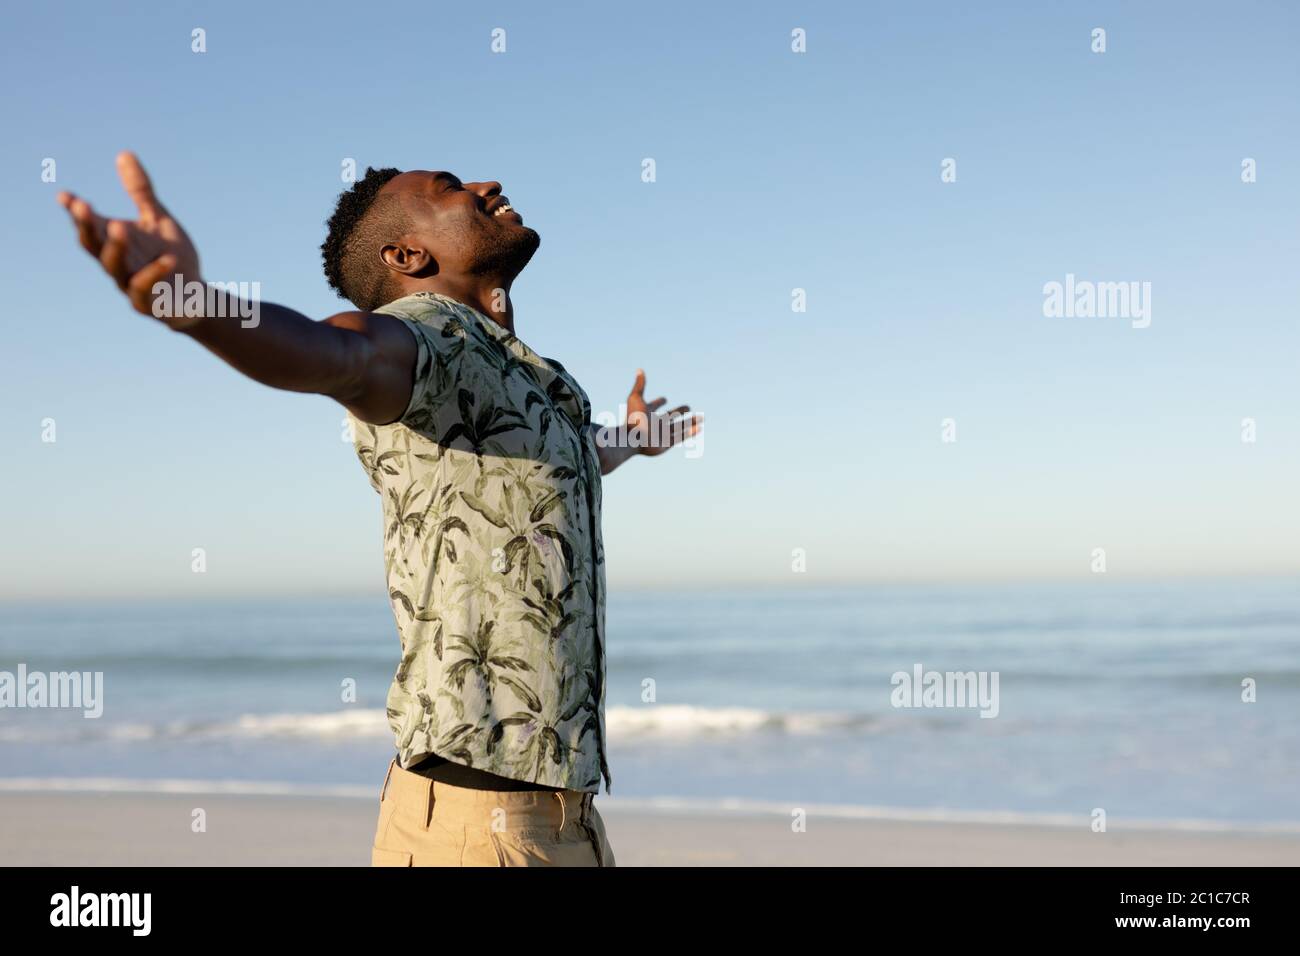 An African American man with his arms outstretched on beach on a sunny day Stock Photo